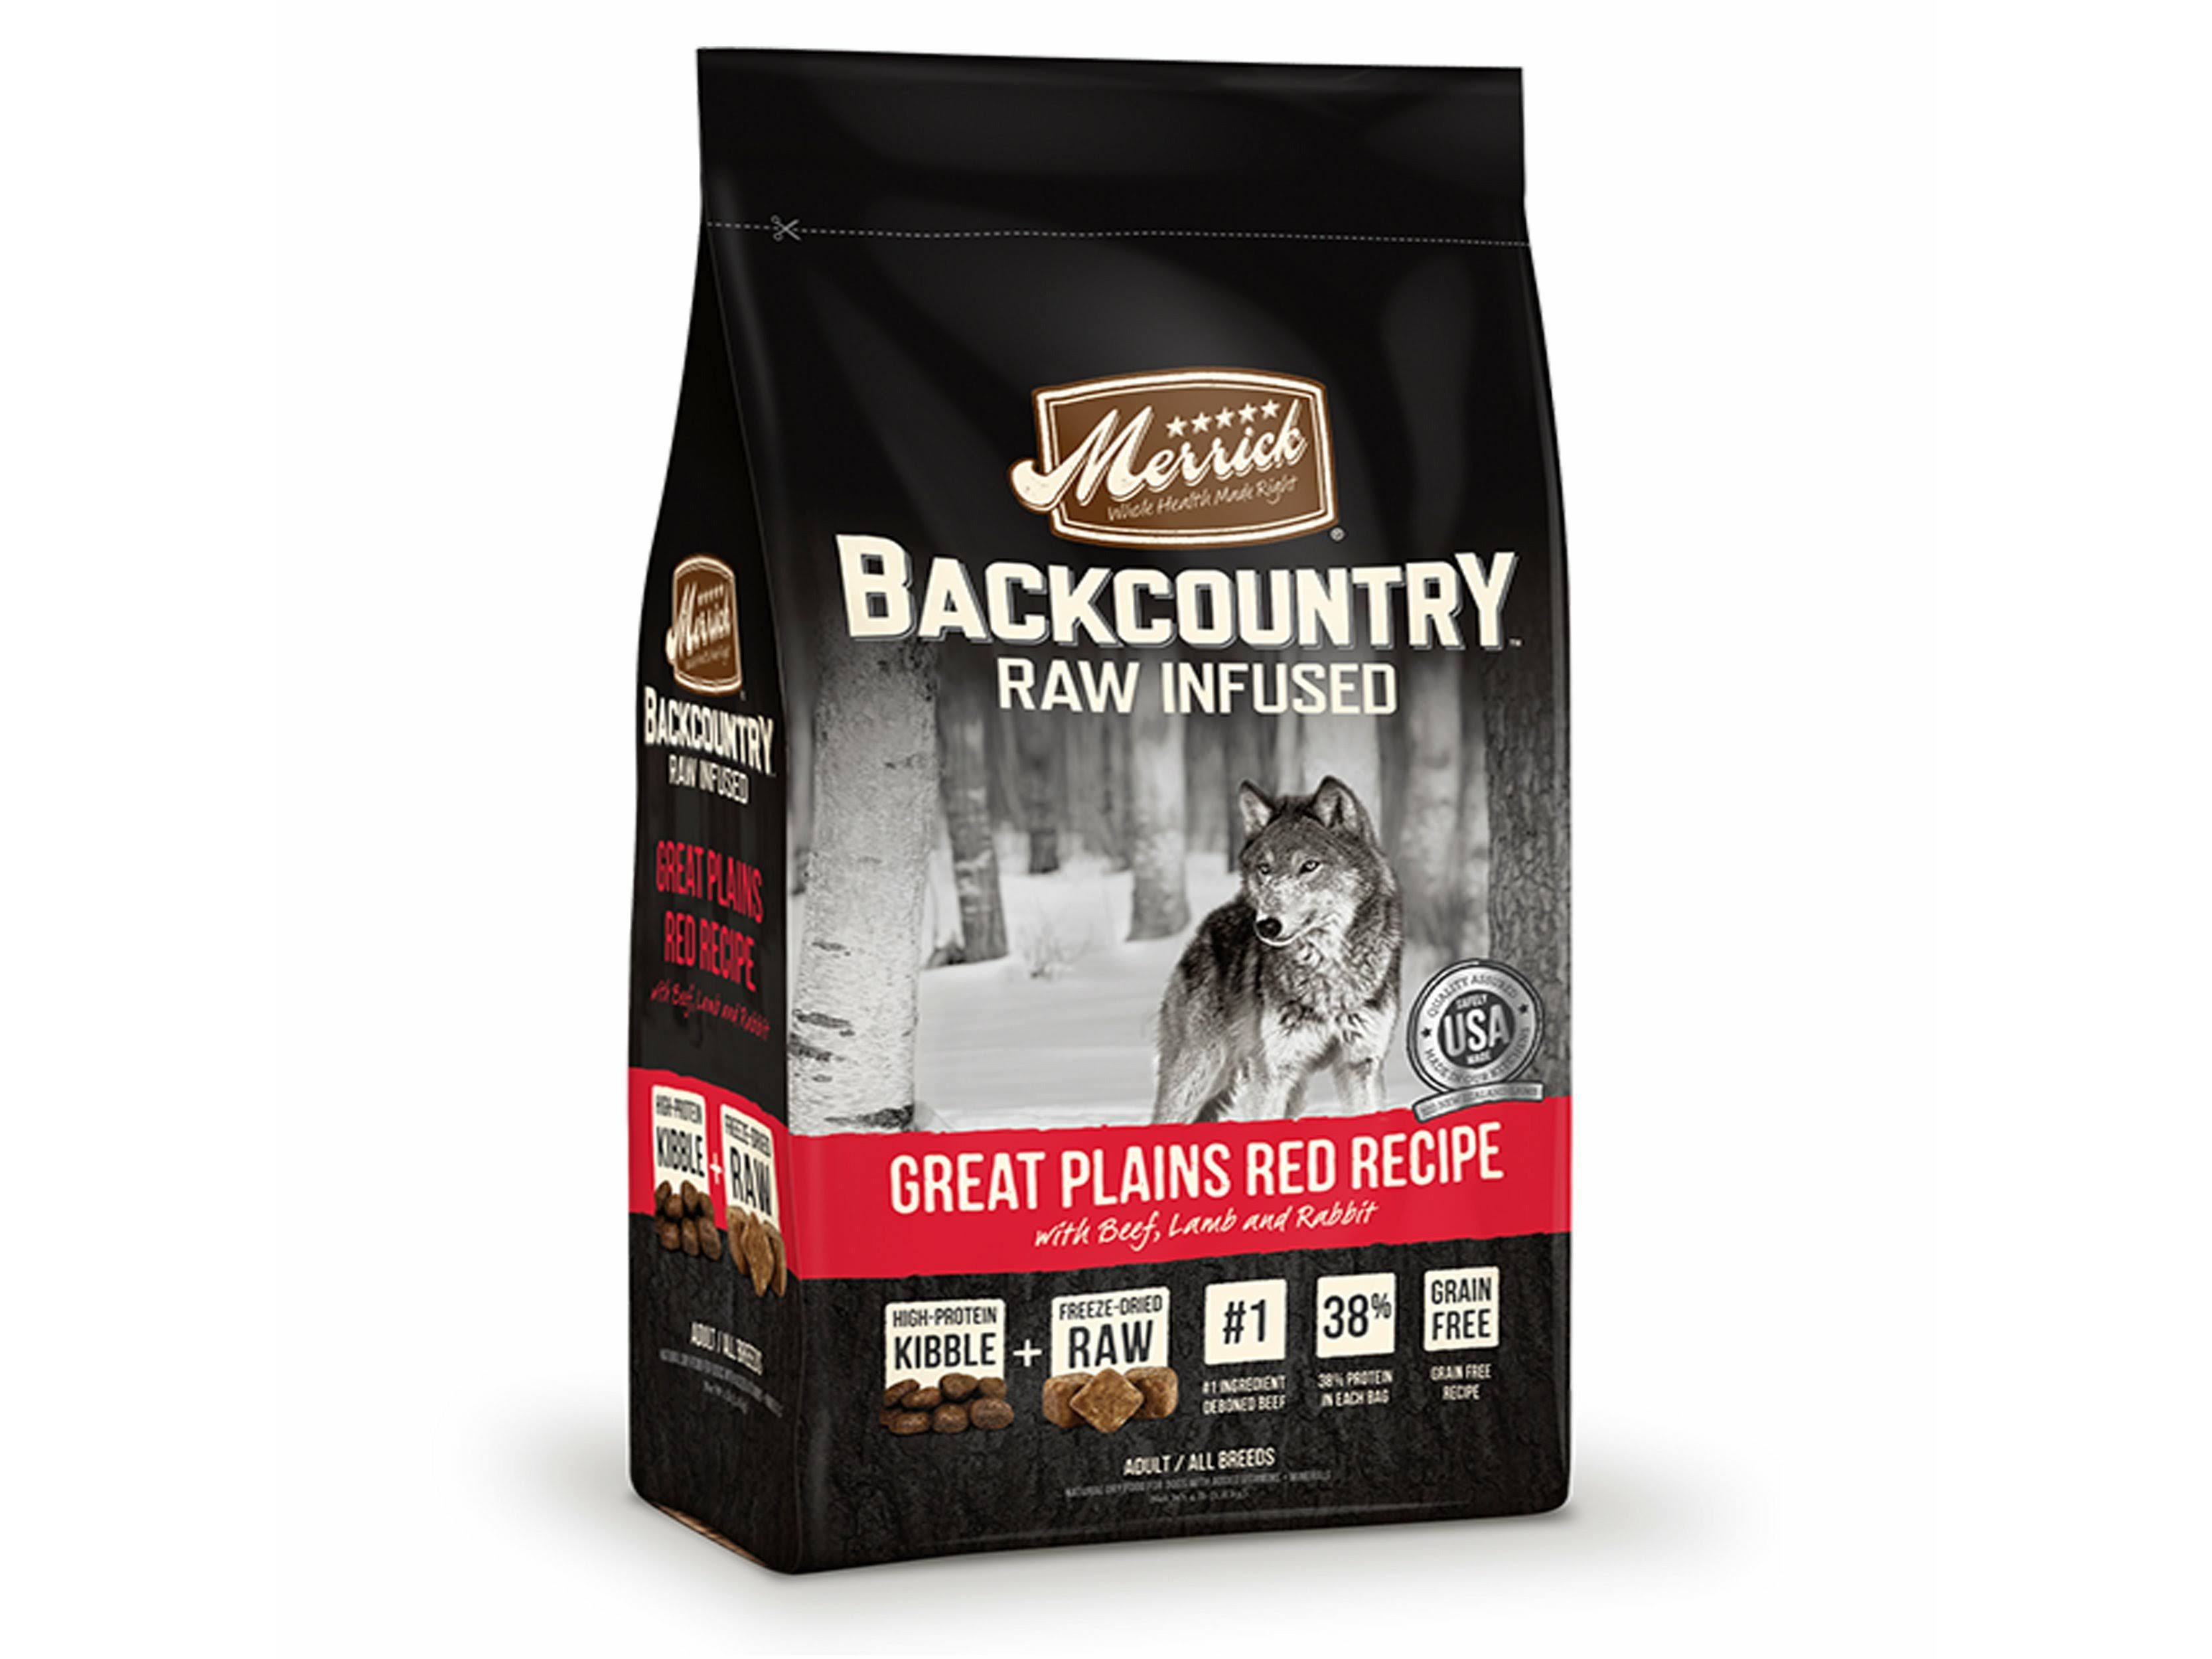 Merrick Backcountry Raw Infused Grain-Free Adult Dry Dog Food - 22 lbs, Great Plains Red Recipe